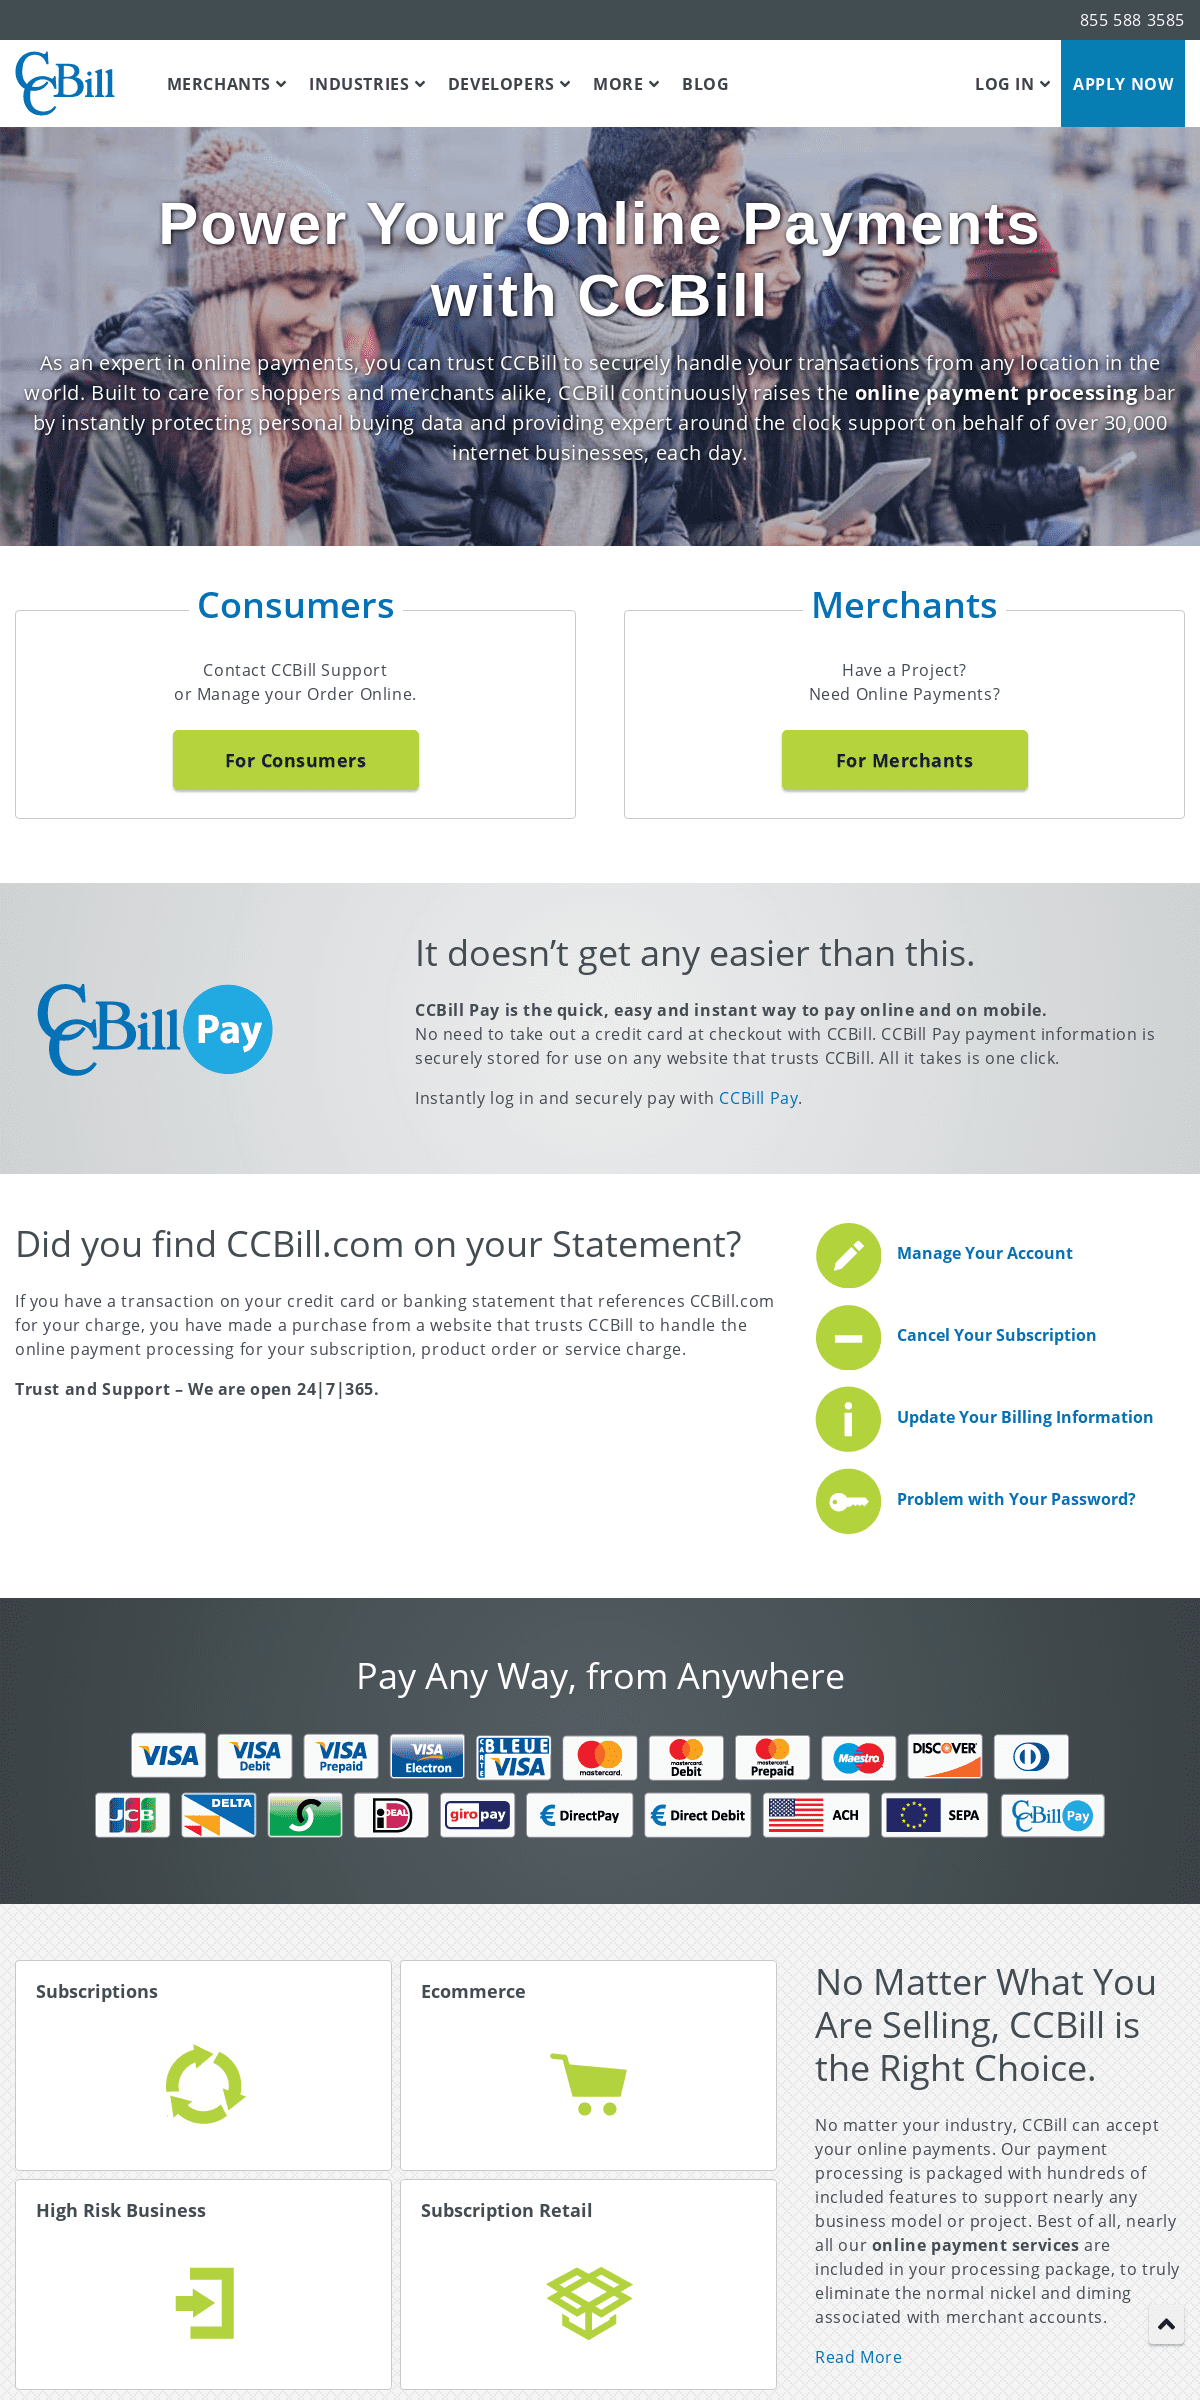 A complete backup of ccbill.com